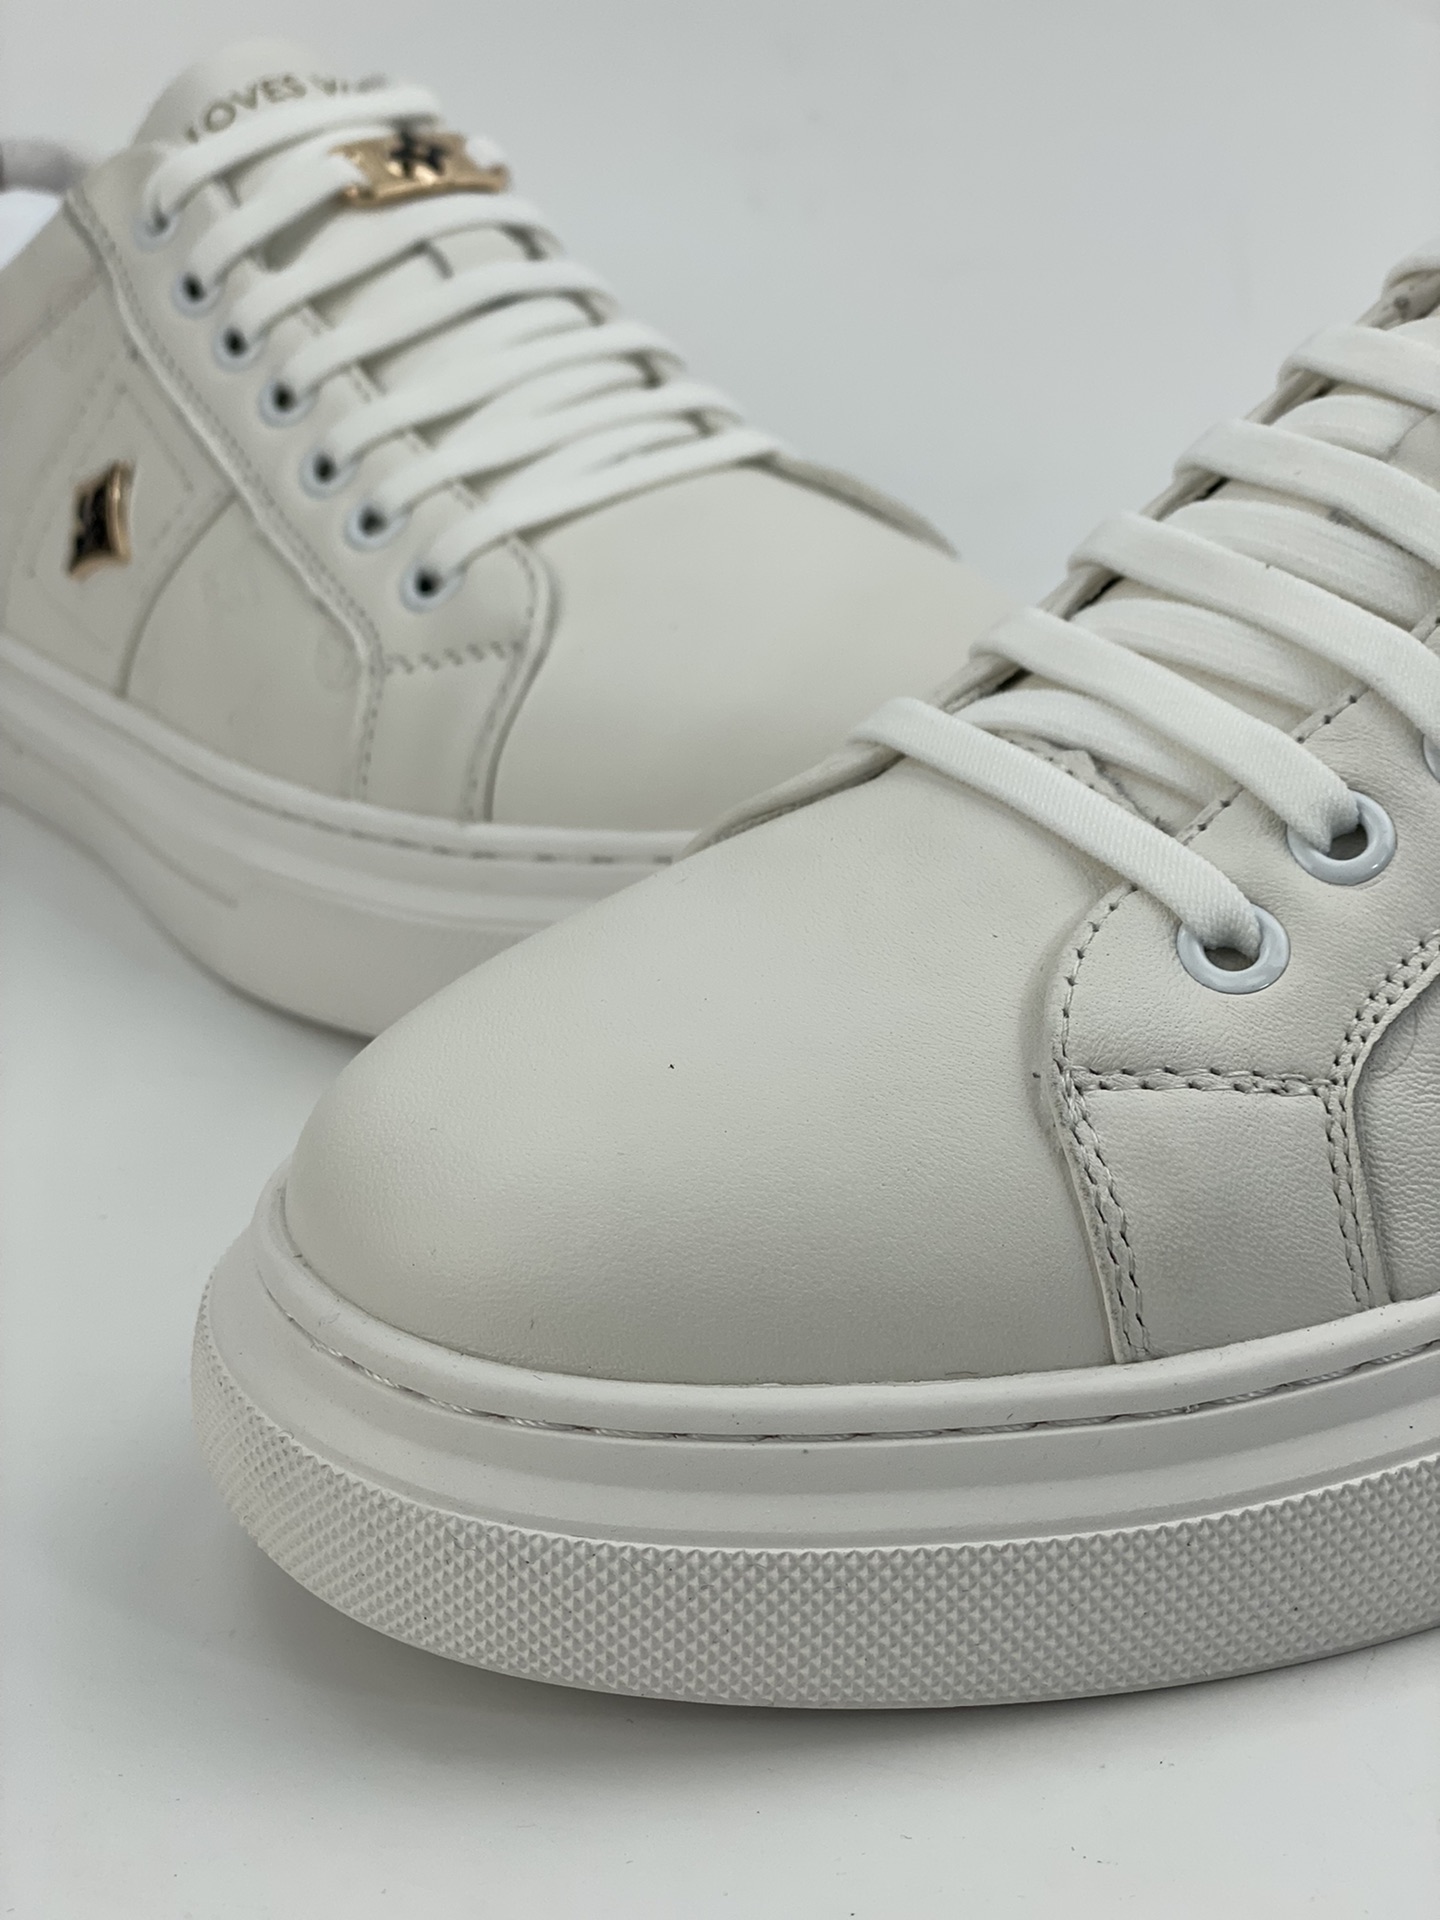 LV 23ss Trainer Sneaker low-top casual sports shoes series